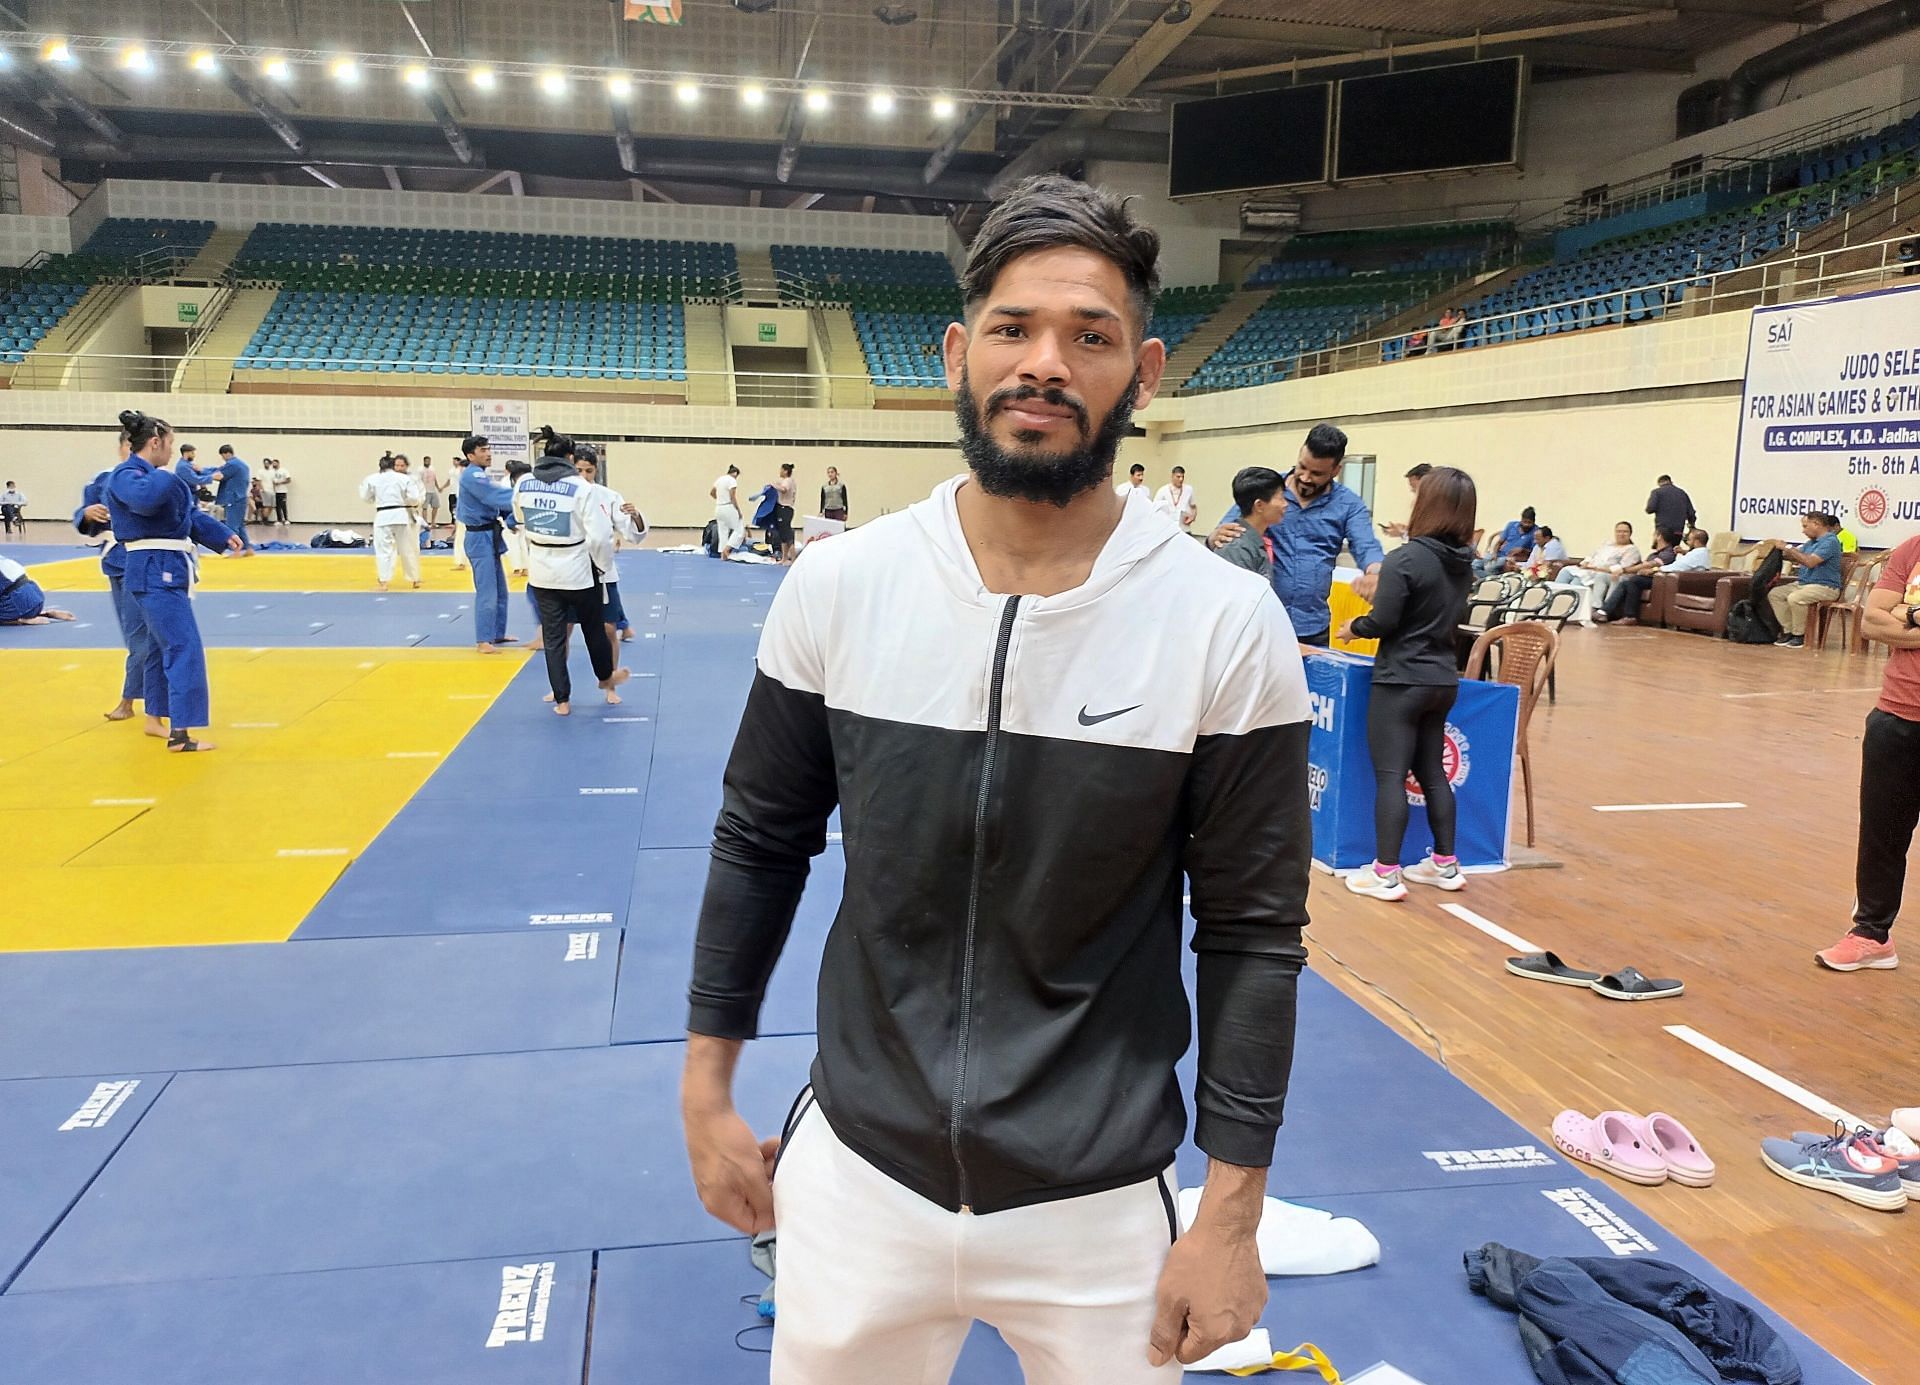 Vijay Yadav, 26 year old Commonwealth Games medalist in judo aims to stay focus in coming months and qualify for the Paris Olympic Games. Photo credit: Navneet Singh